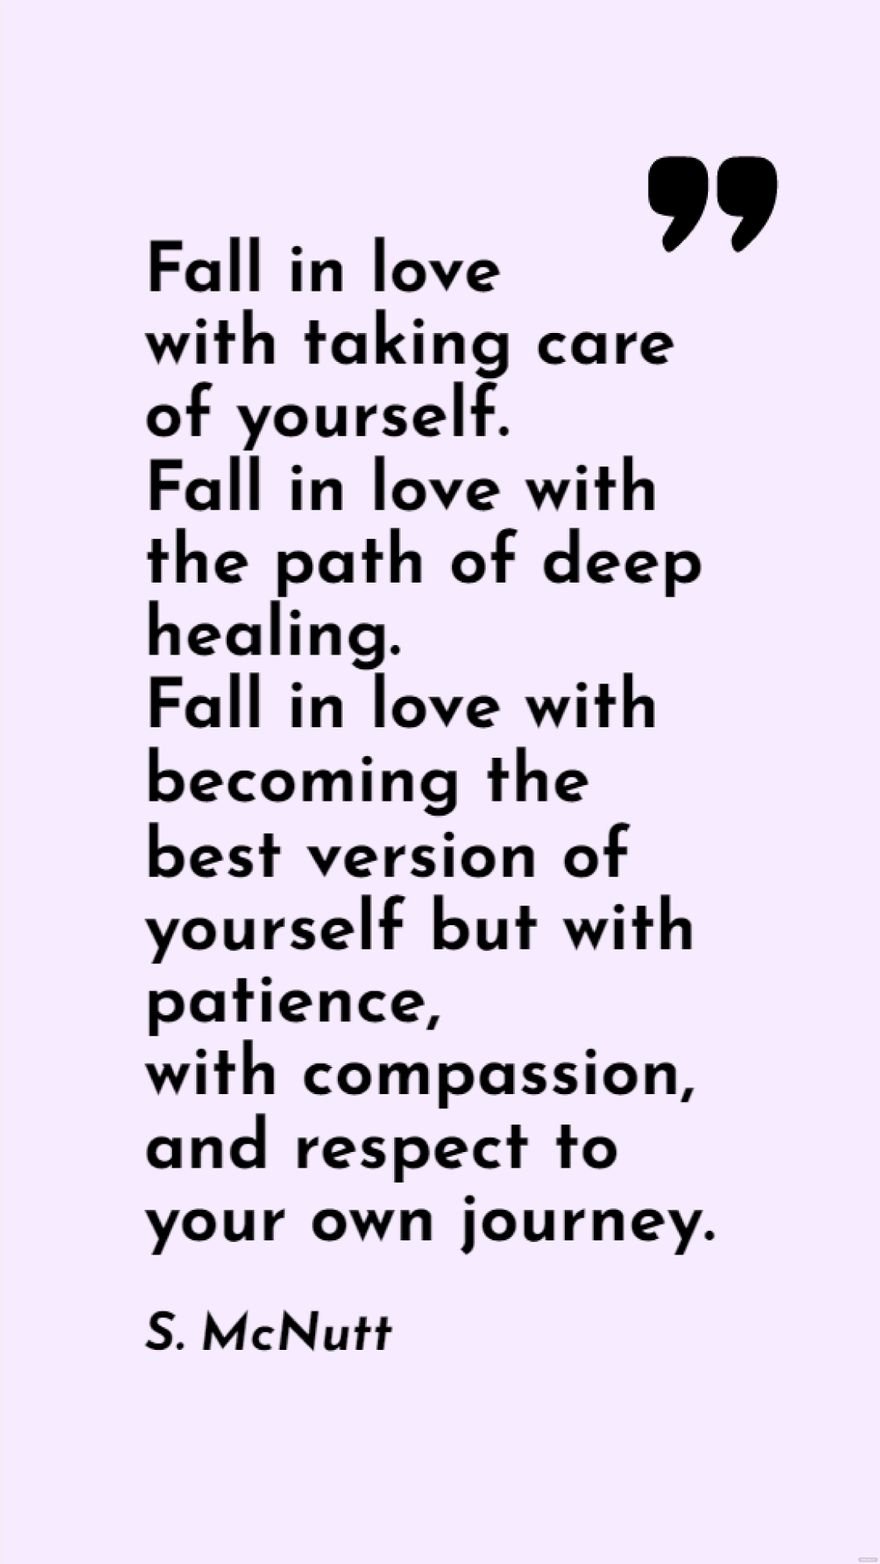 S. McNutt - Fall in love with taking care of yourself. Fall in love with the path of deep healing. Fall in love with becoming the best version of yourself but with patience, with compassion, and respe